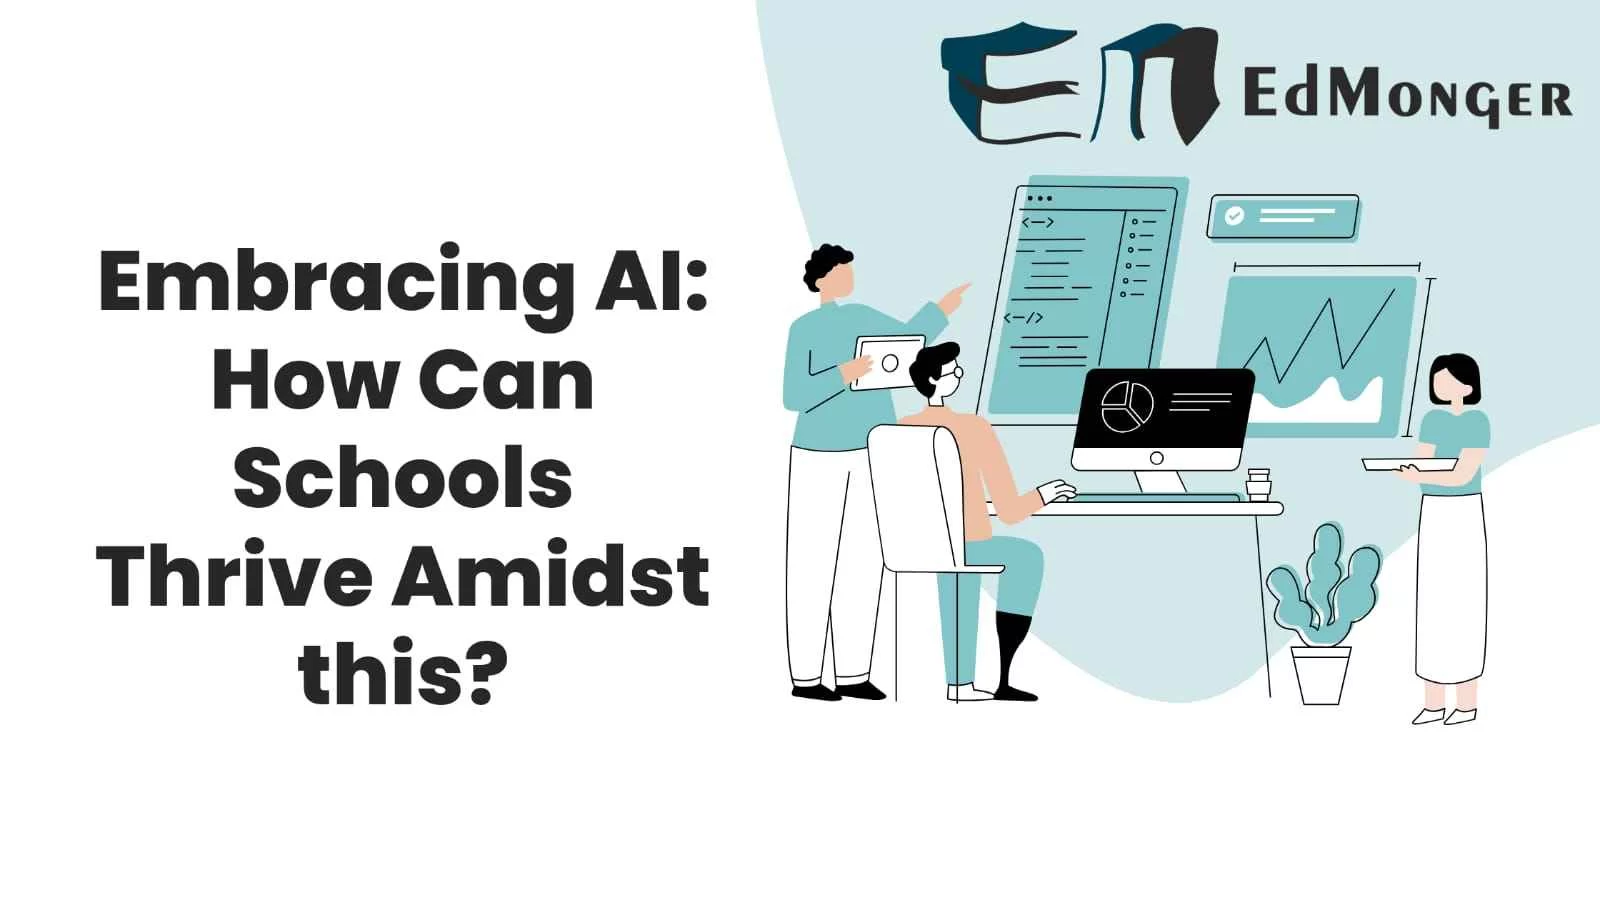 Embracing Ai: How Schools Can Thrive Amidst Technological Change?